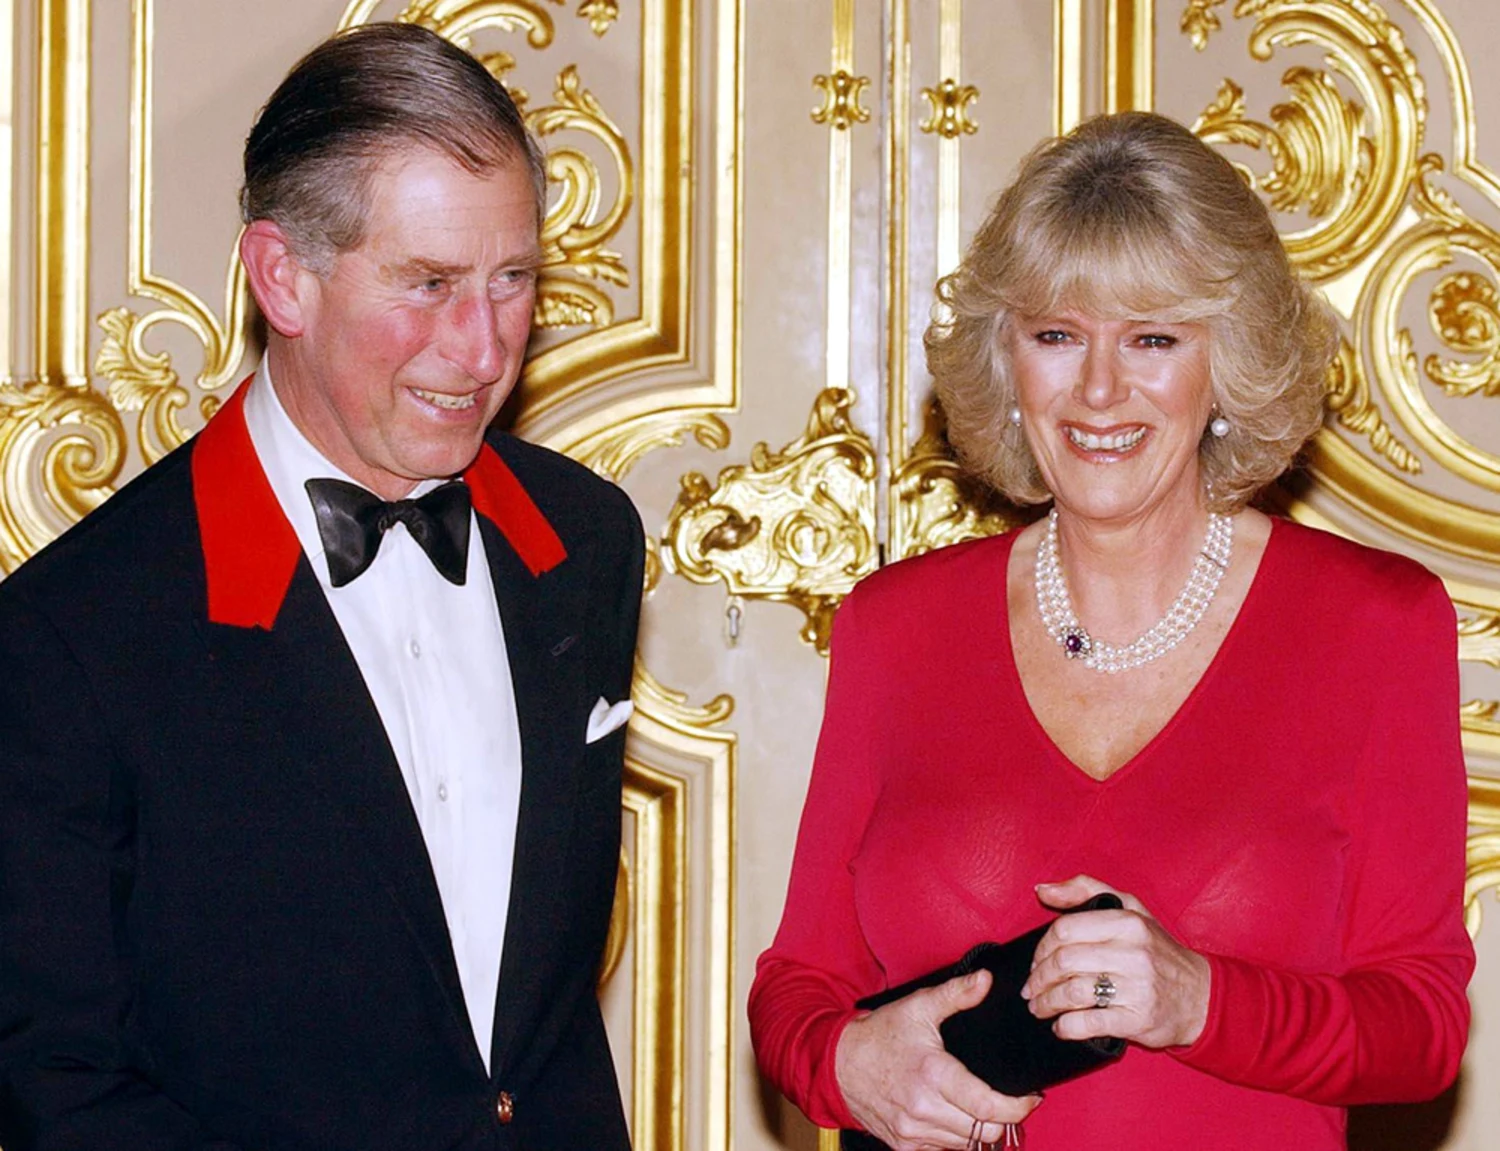 Did Charles and Camilla have a child? - ABTC